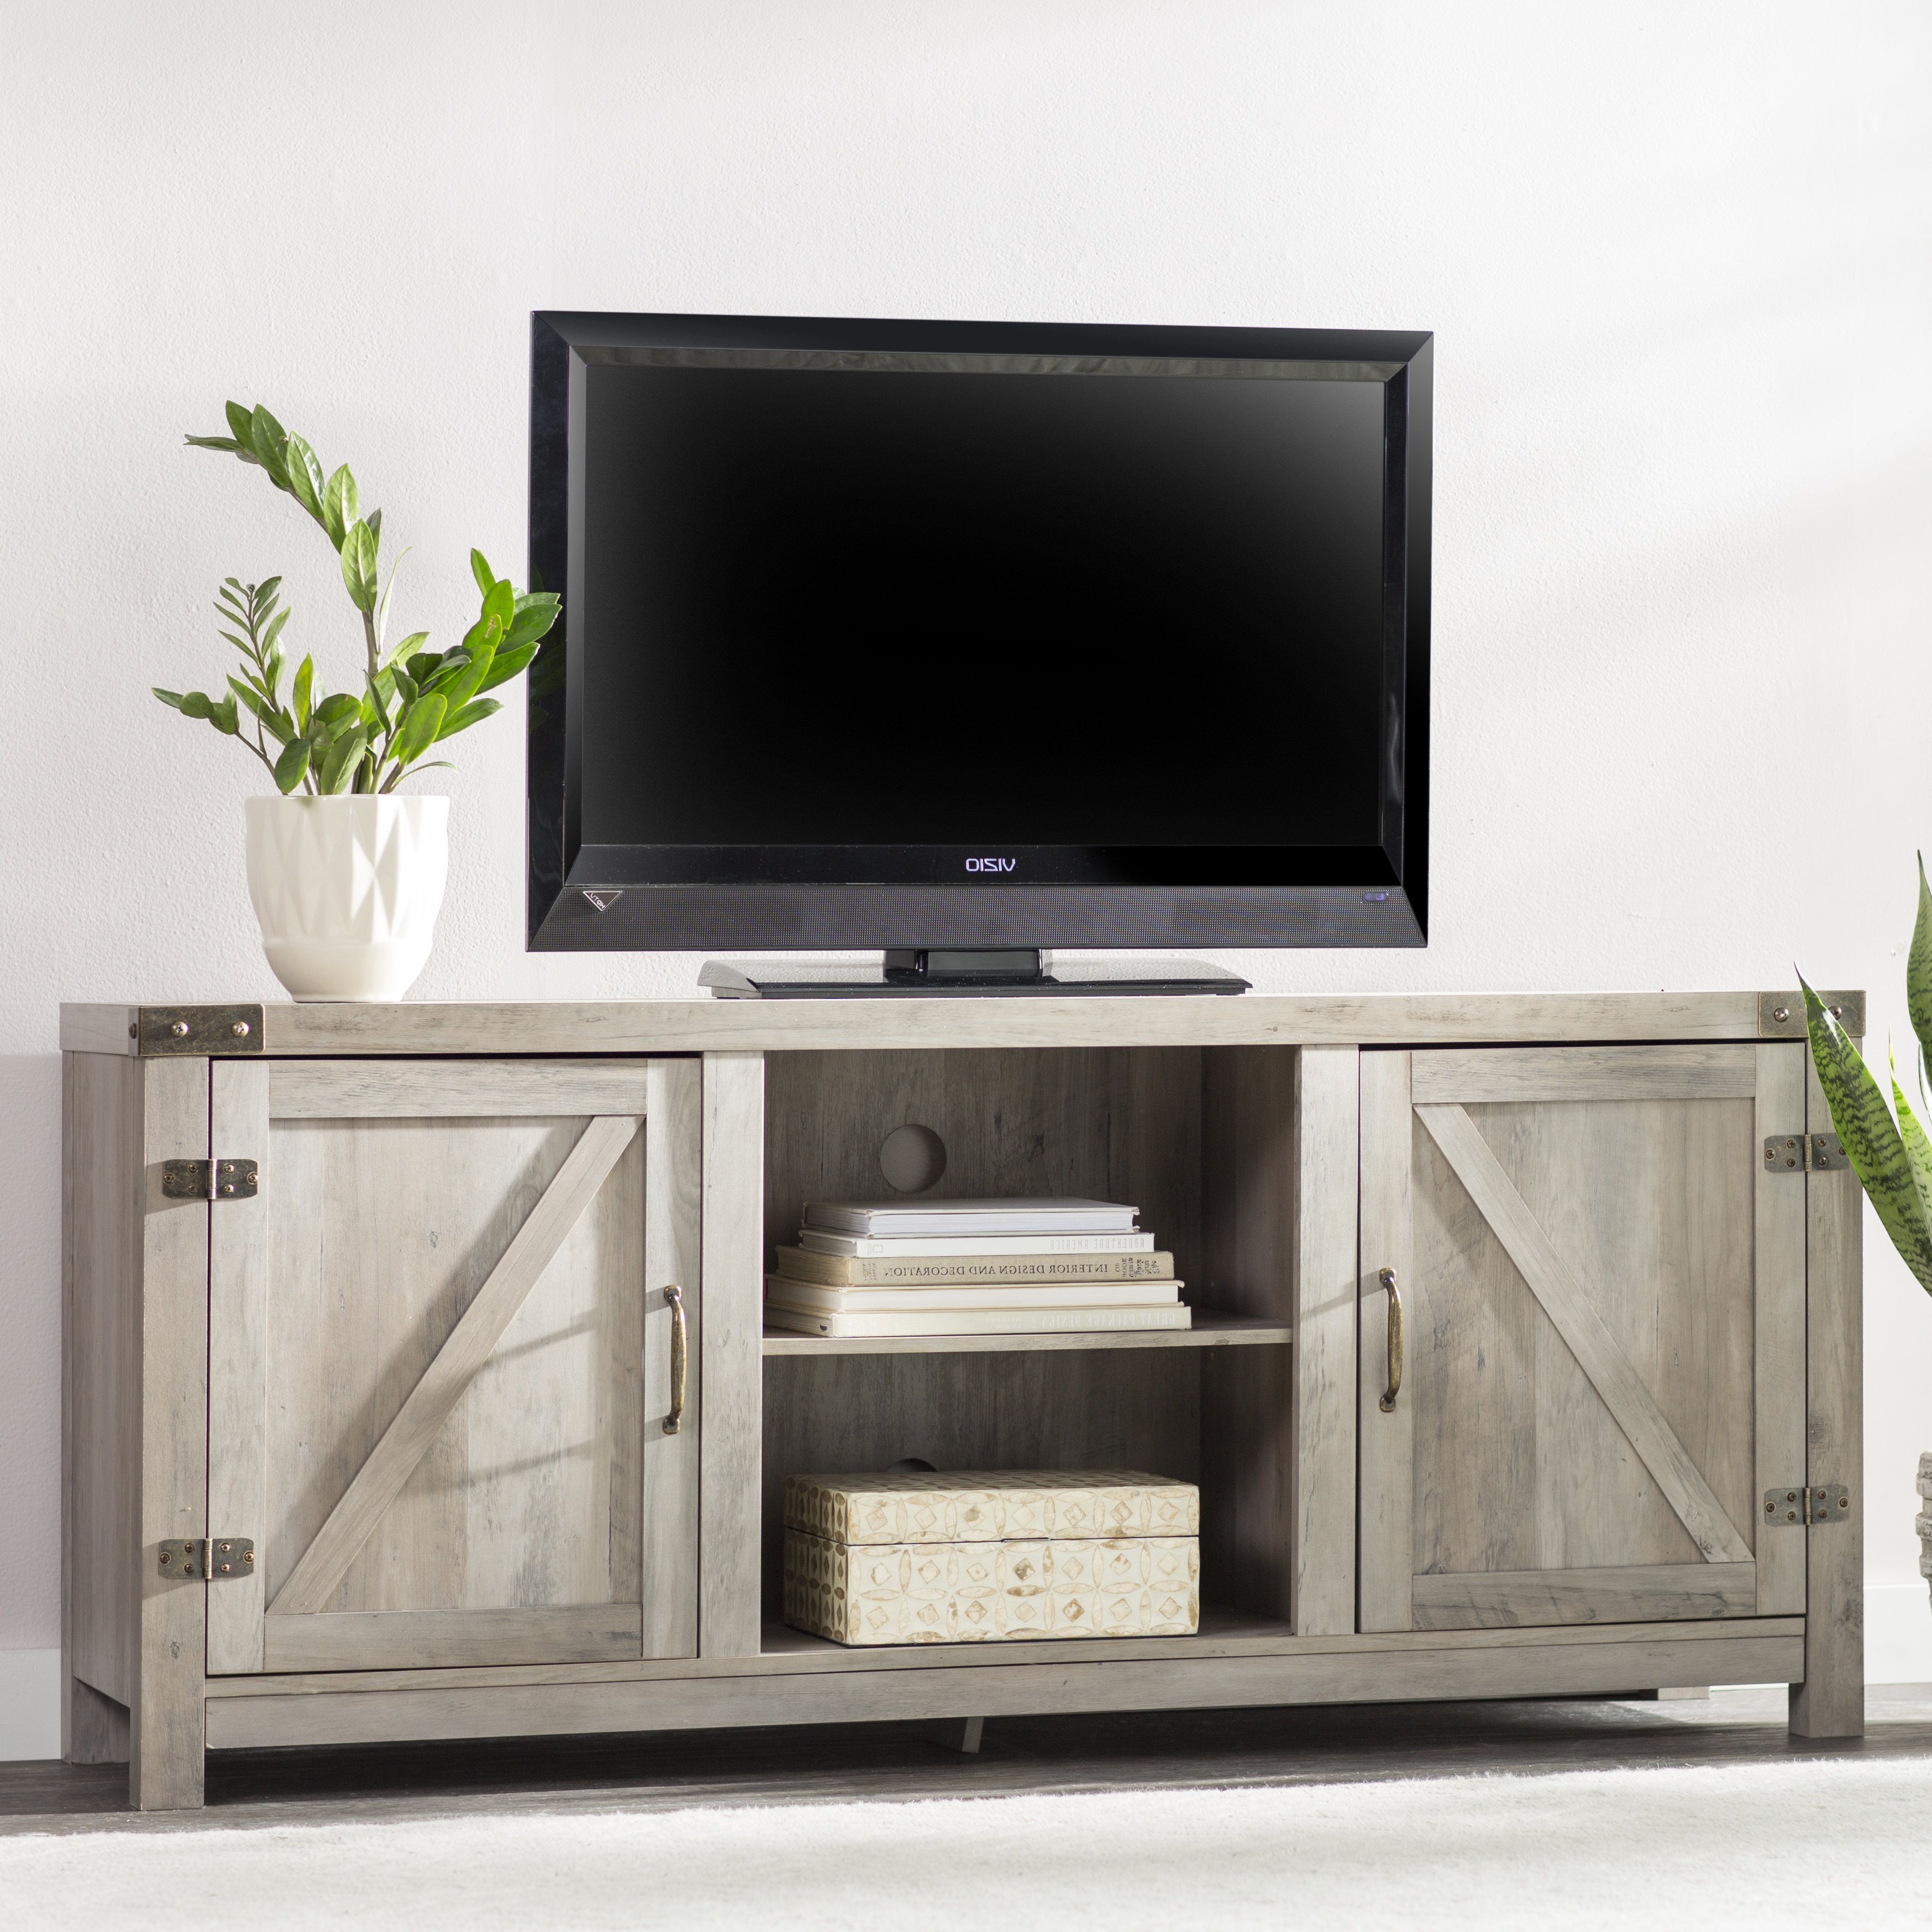 Widely Used Vizio 24 Inch Tv Stands Regarding Tv Stand For Tvs Up To  (View 16 of 20)